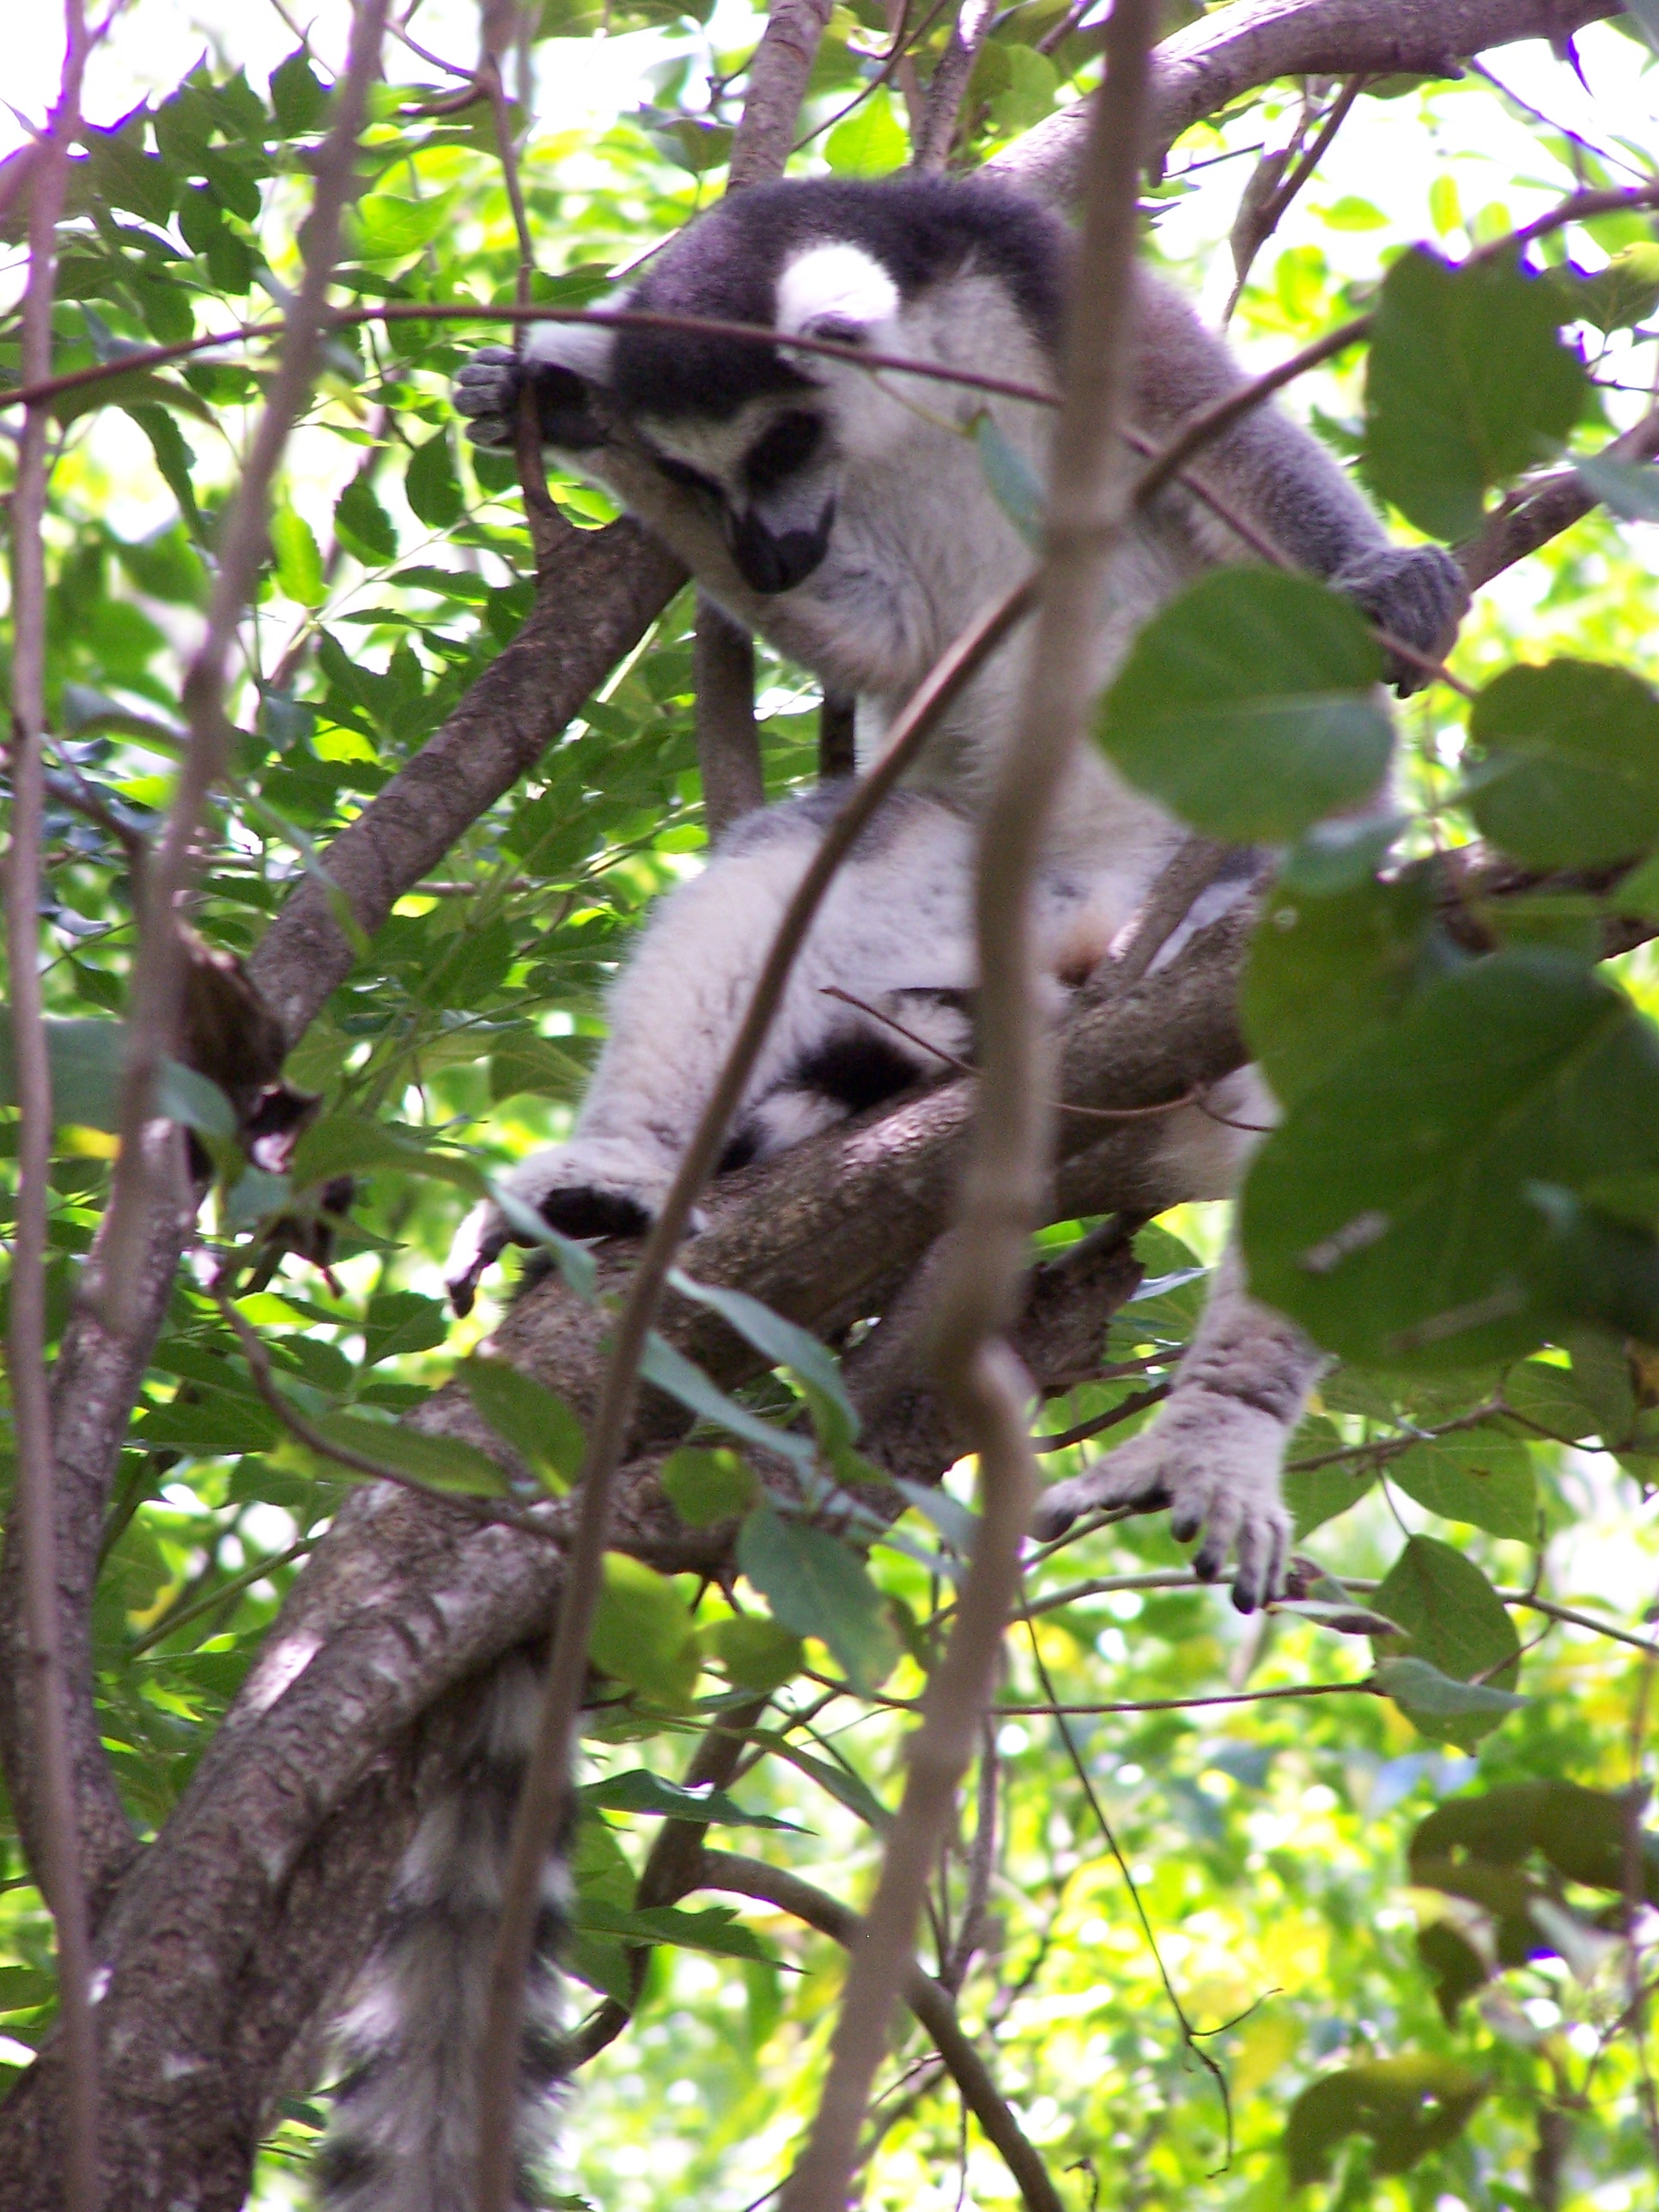 A Lemur chilling in a shaddy tree.